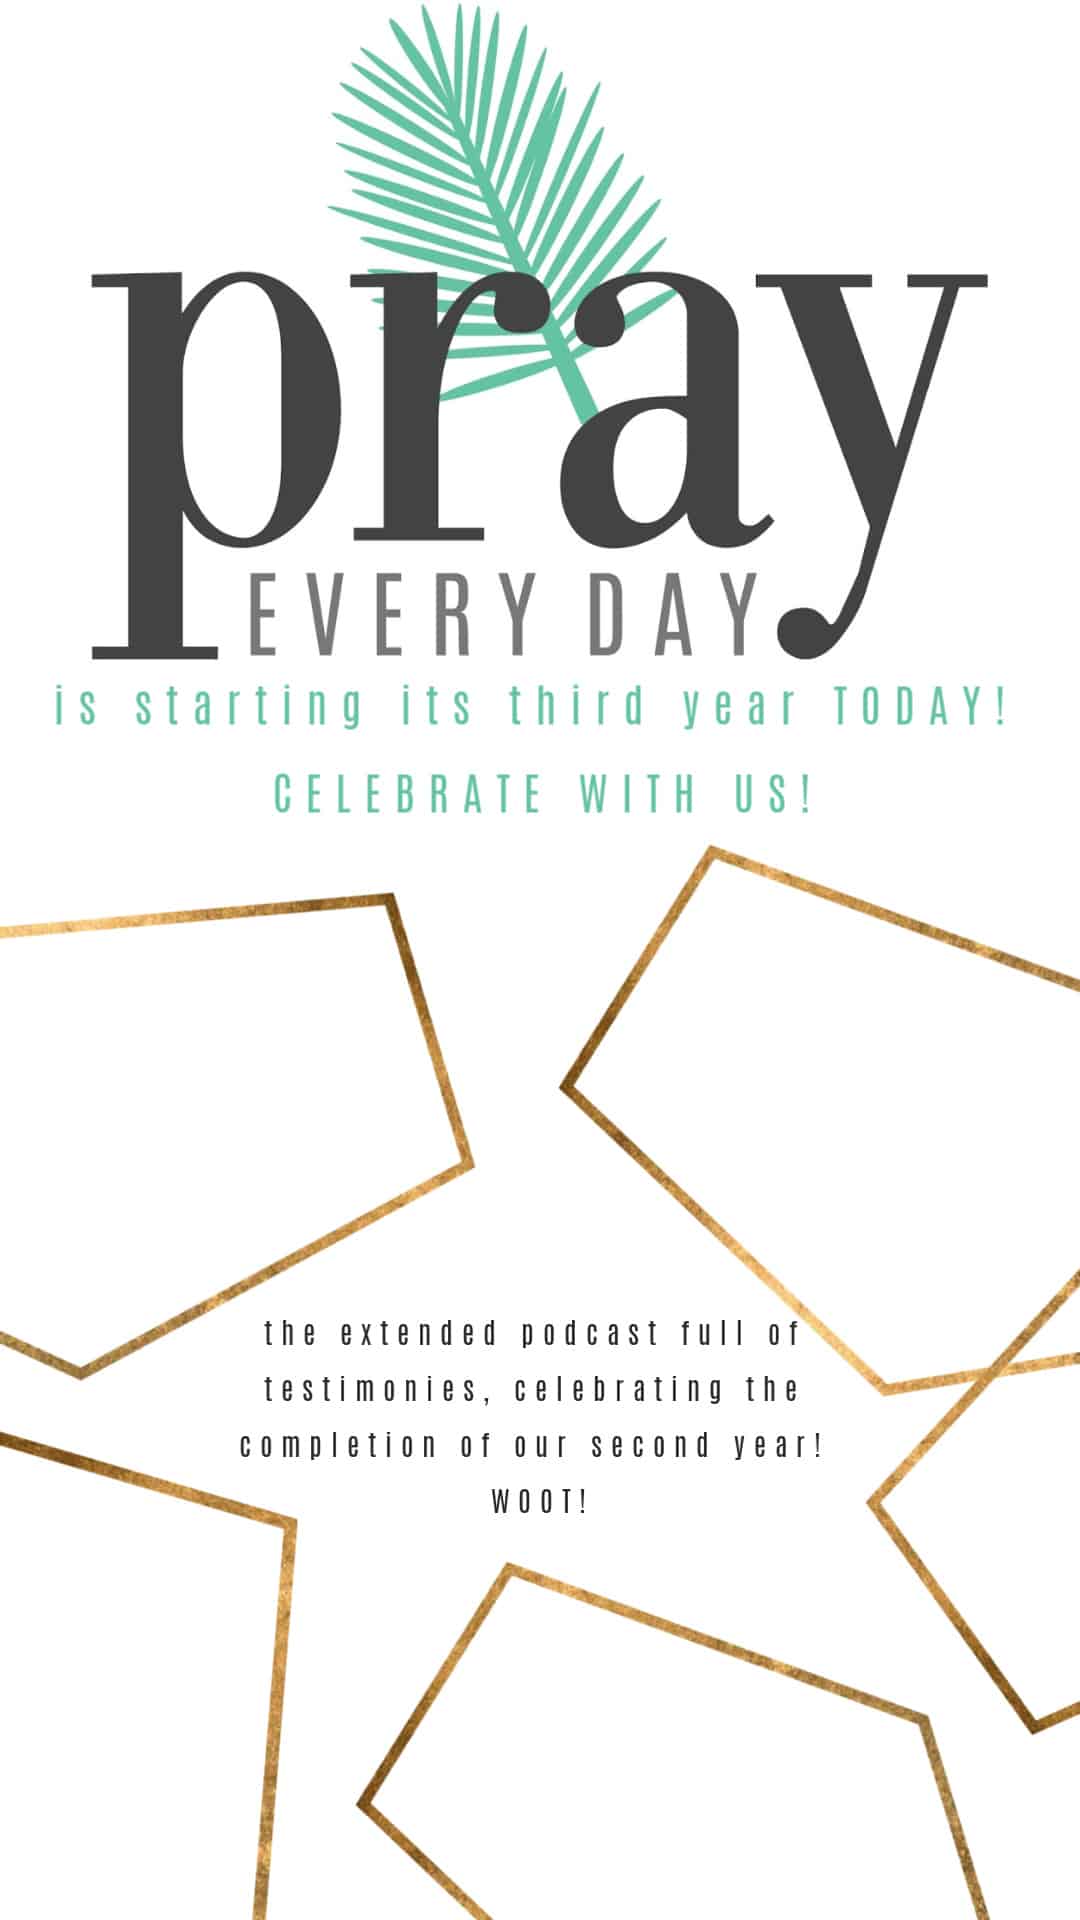 Pray Every Day is TWO!